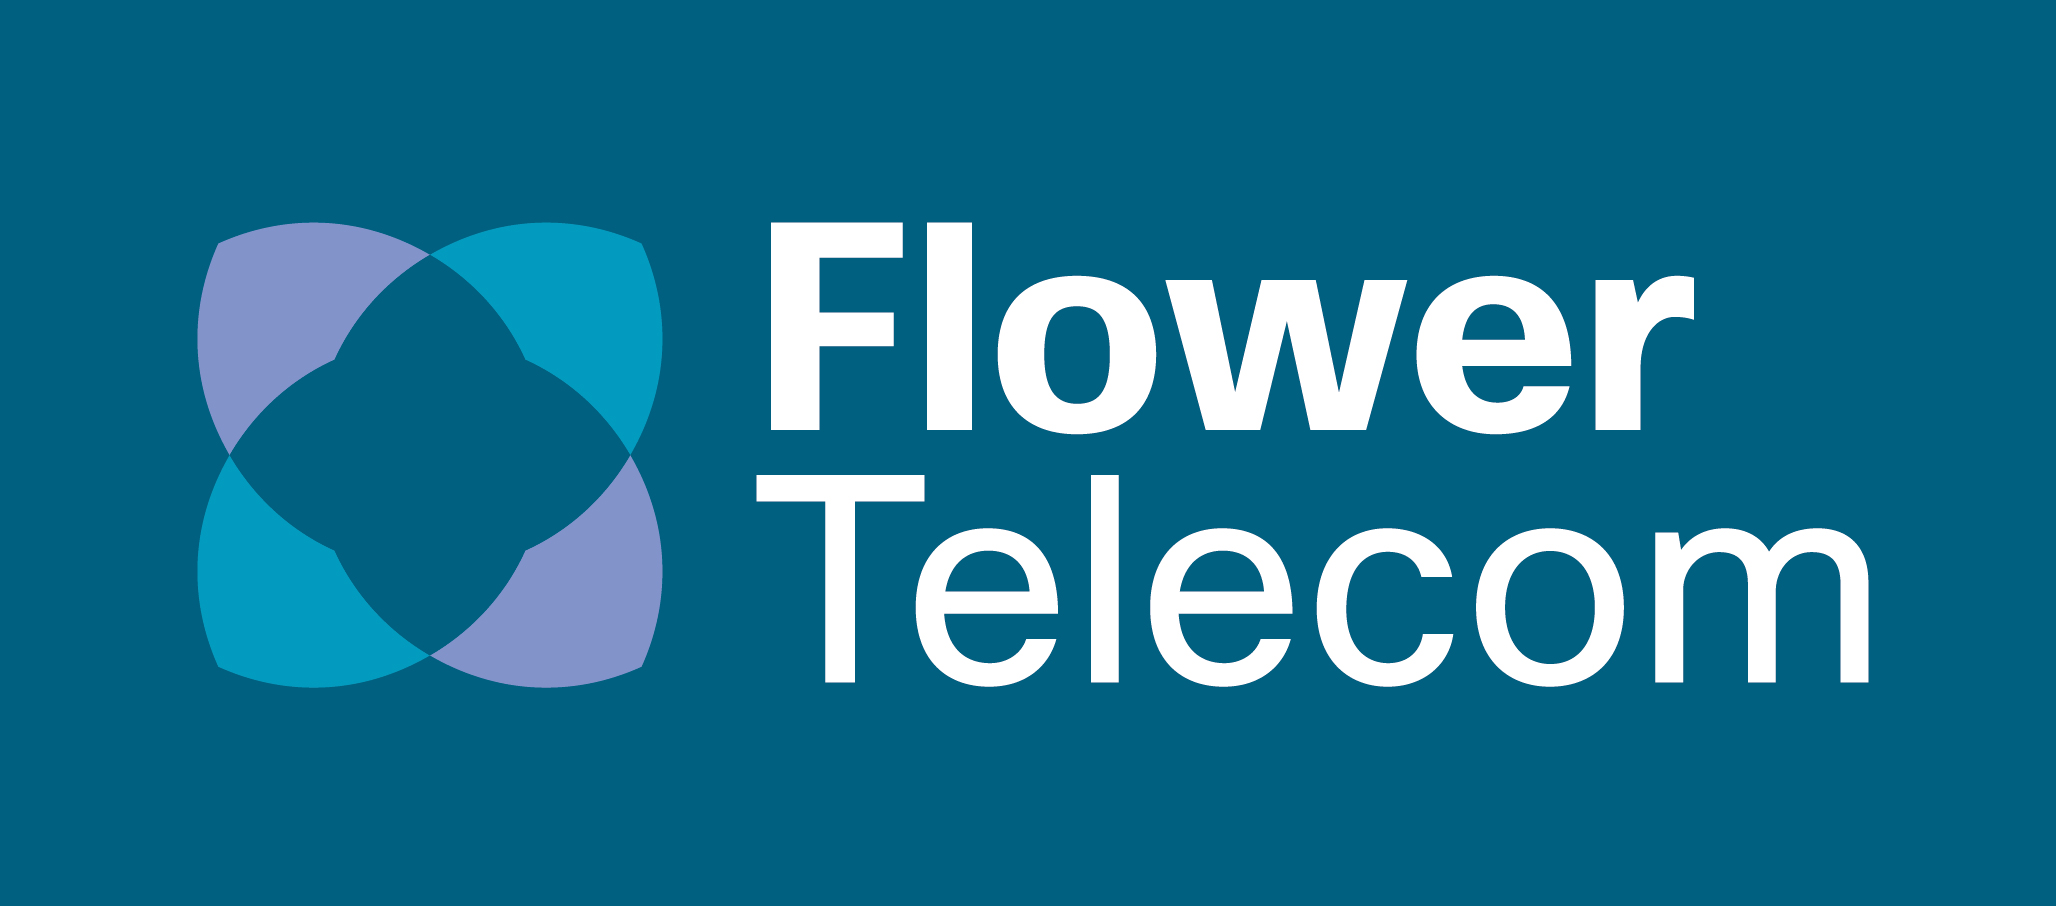 Flower Telecom is aiming to help businesses blossom with future-proof phone systems - Dudley News